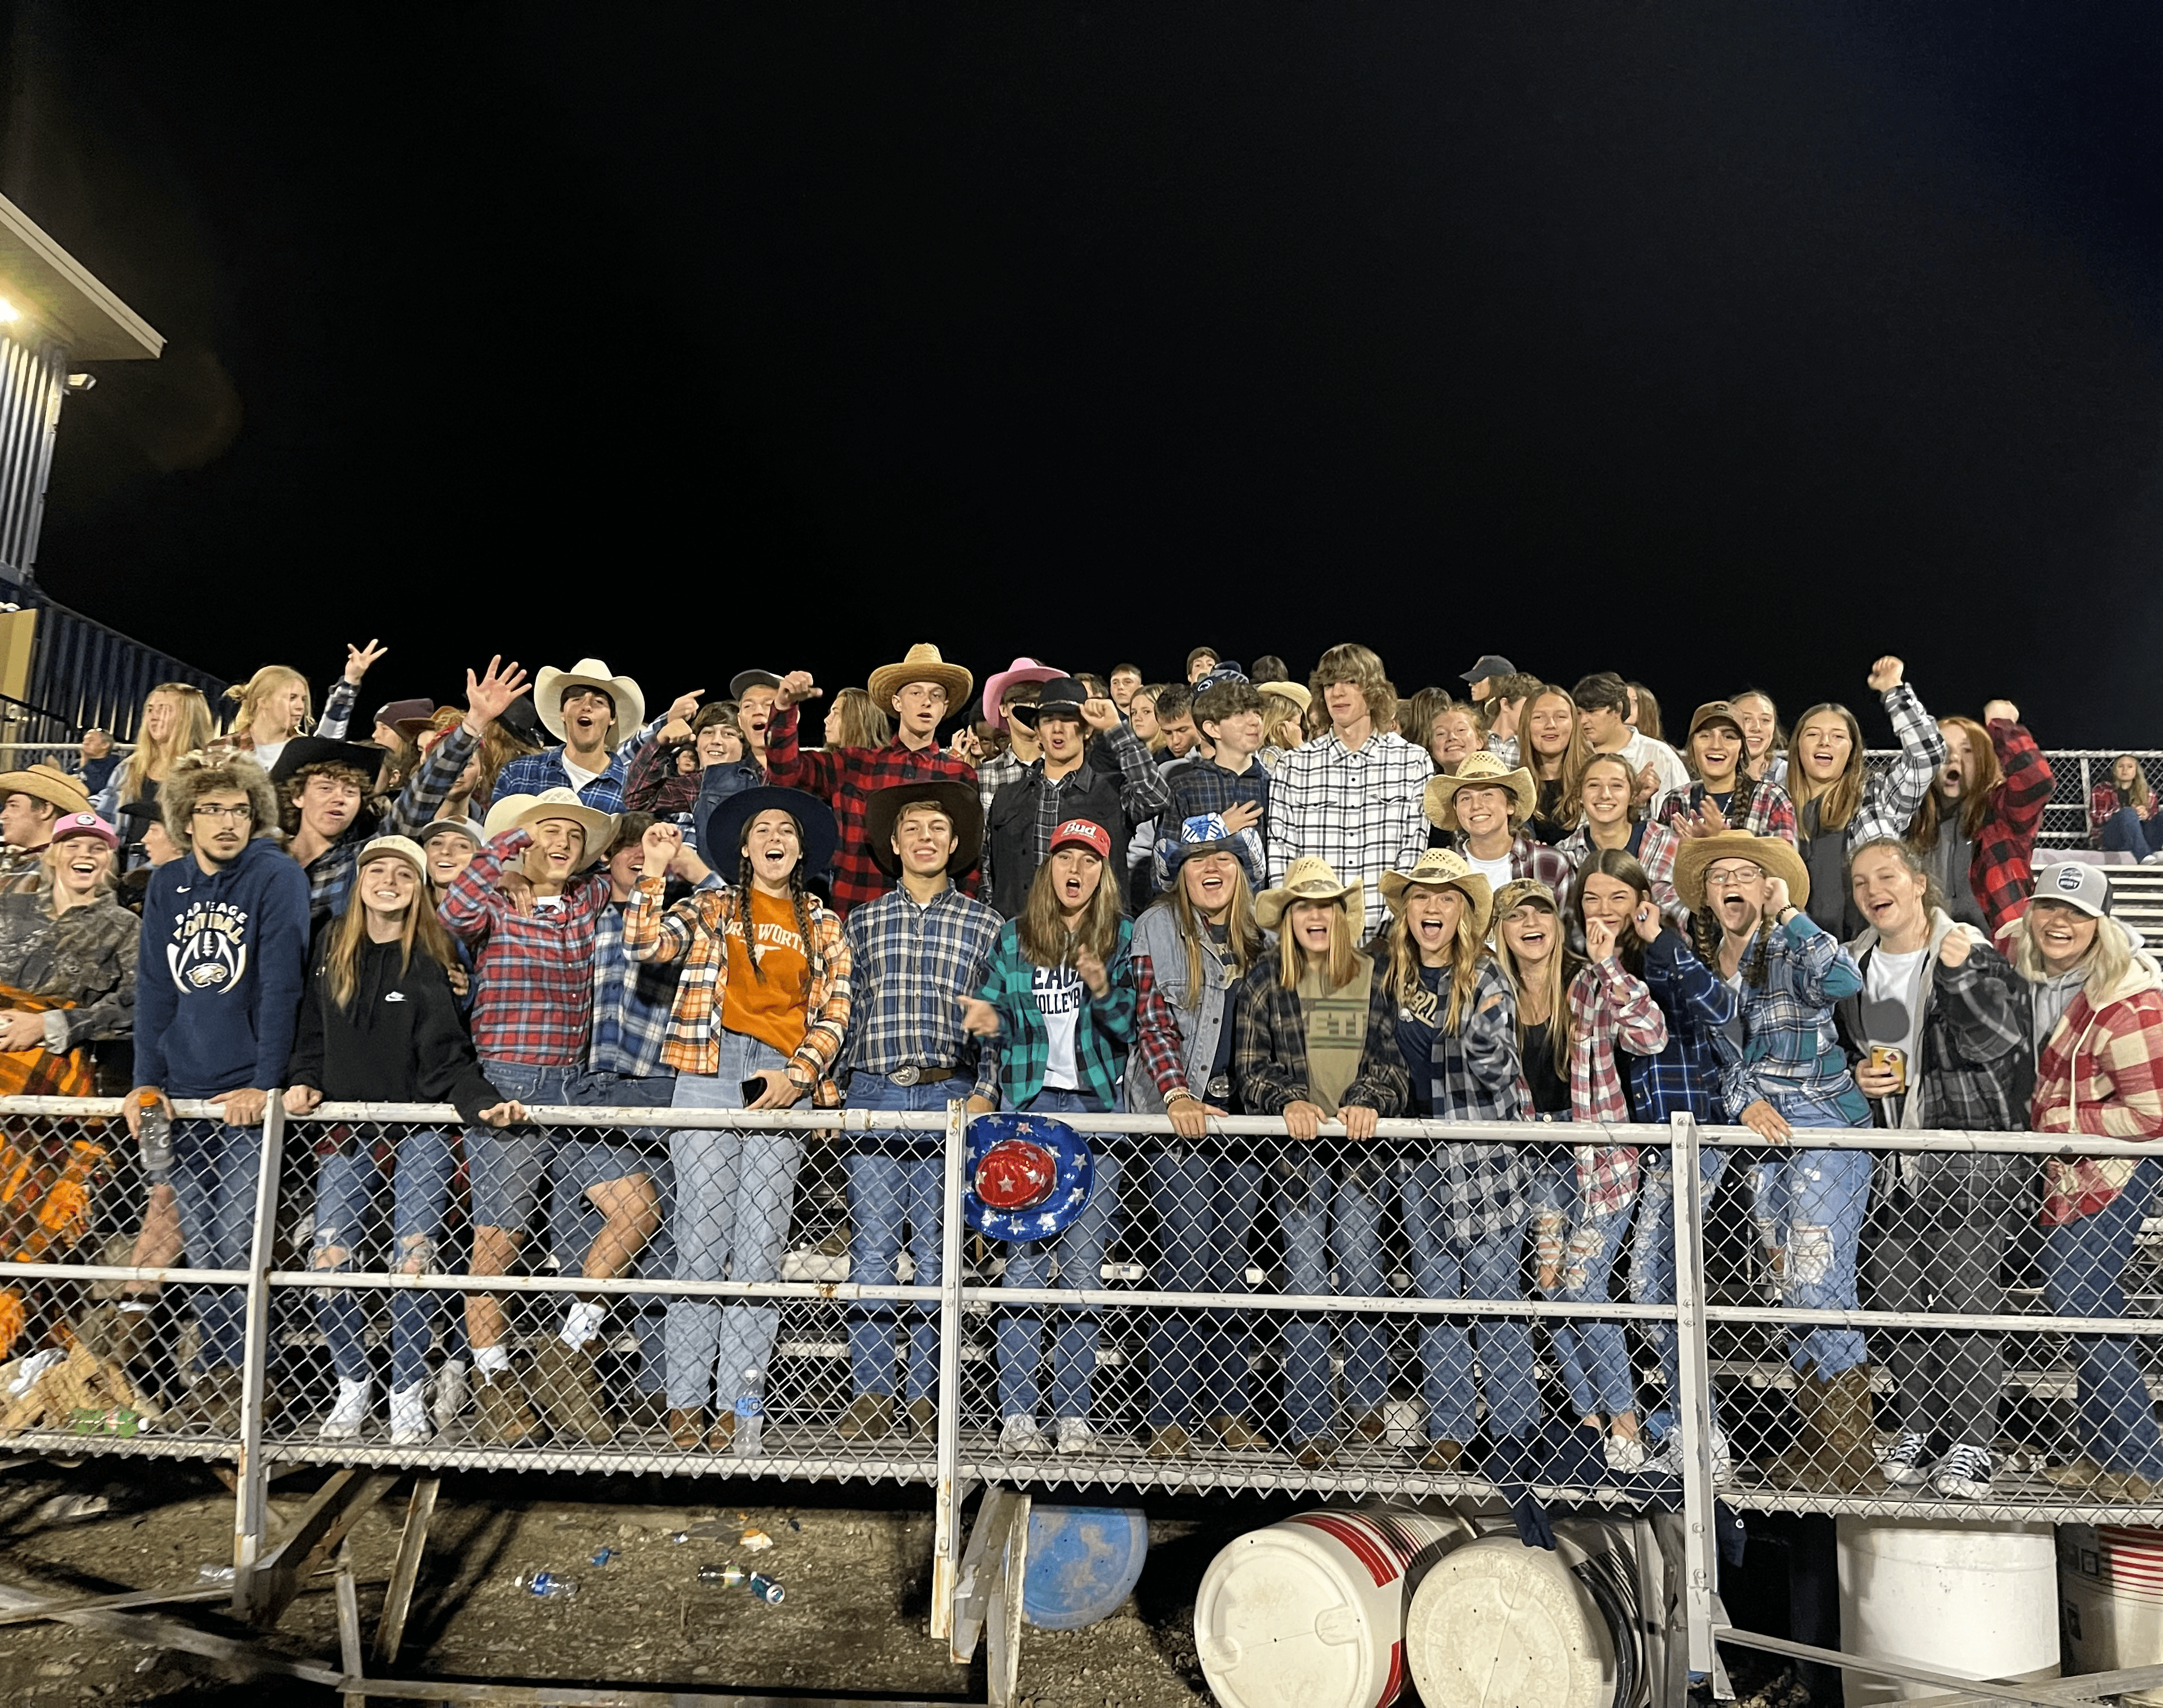 Students dressed up in flannels and cowboy hats at a rodeo!